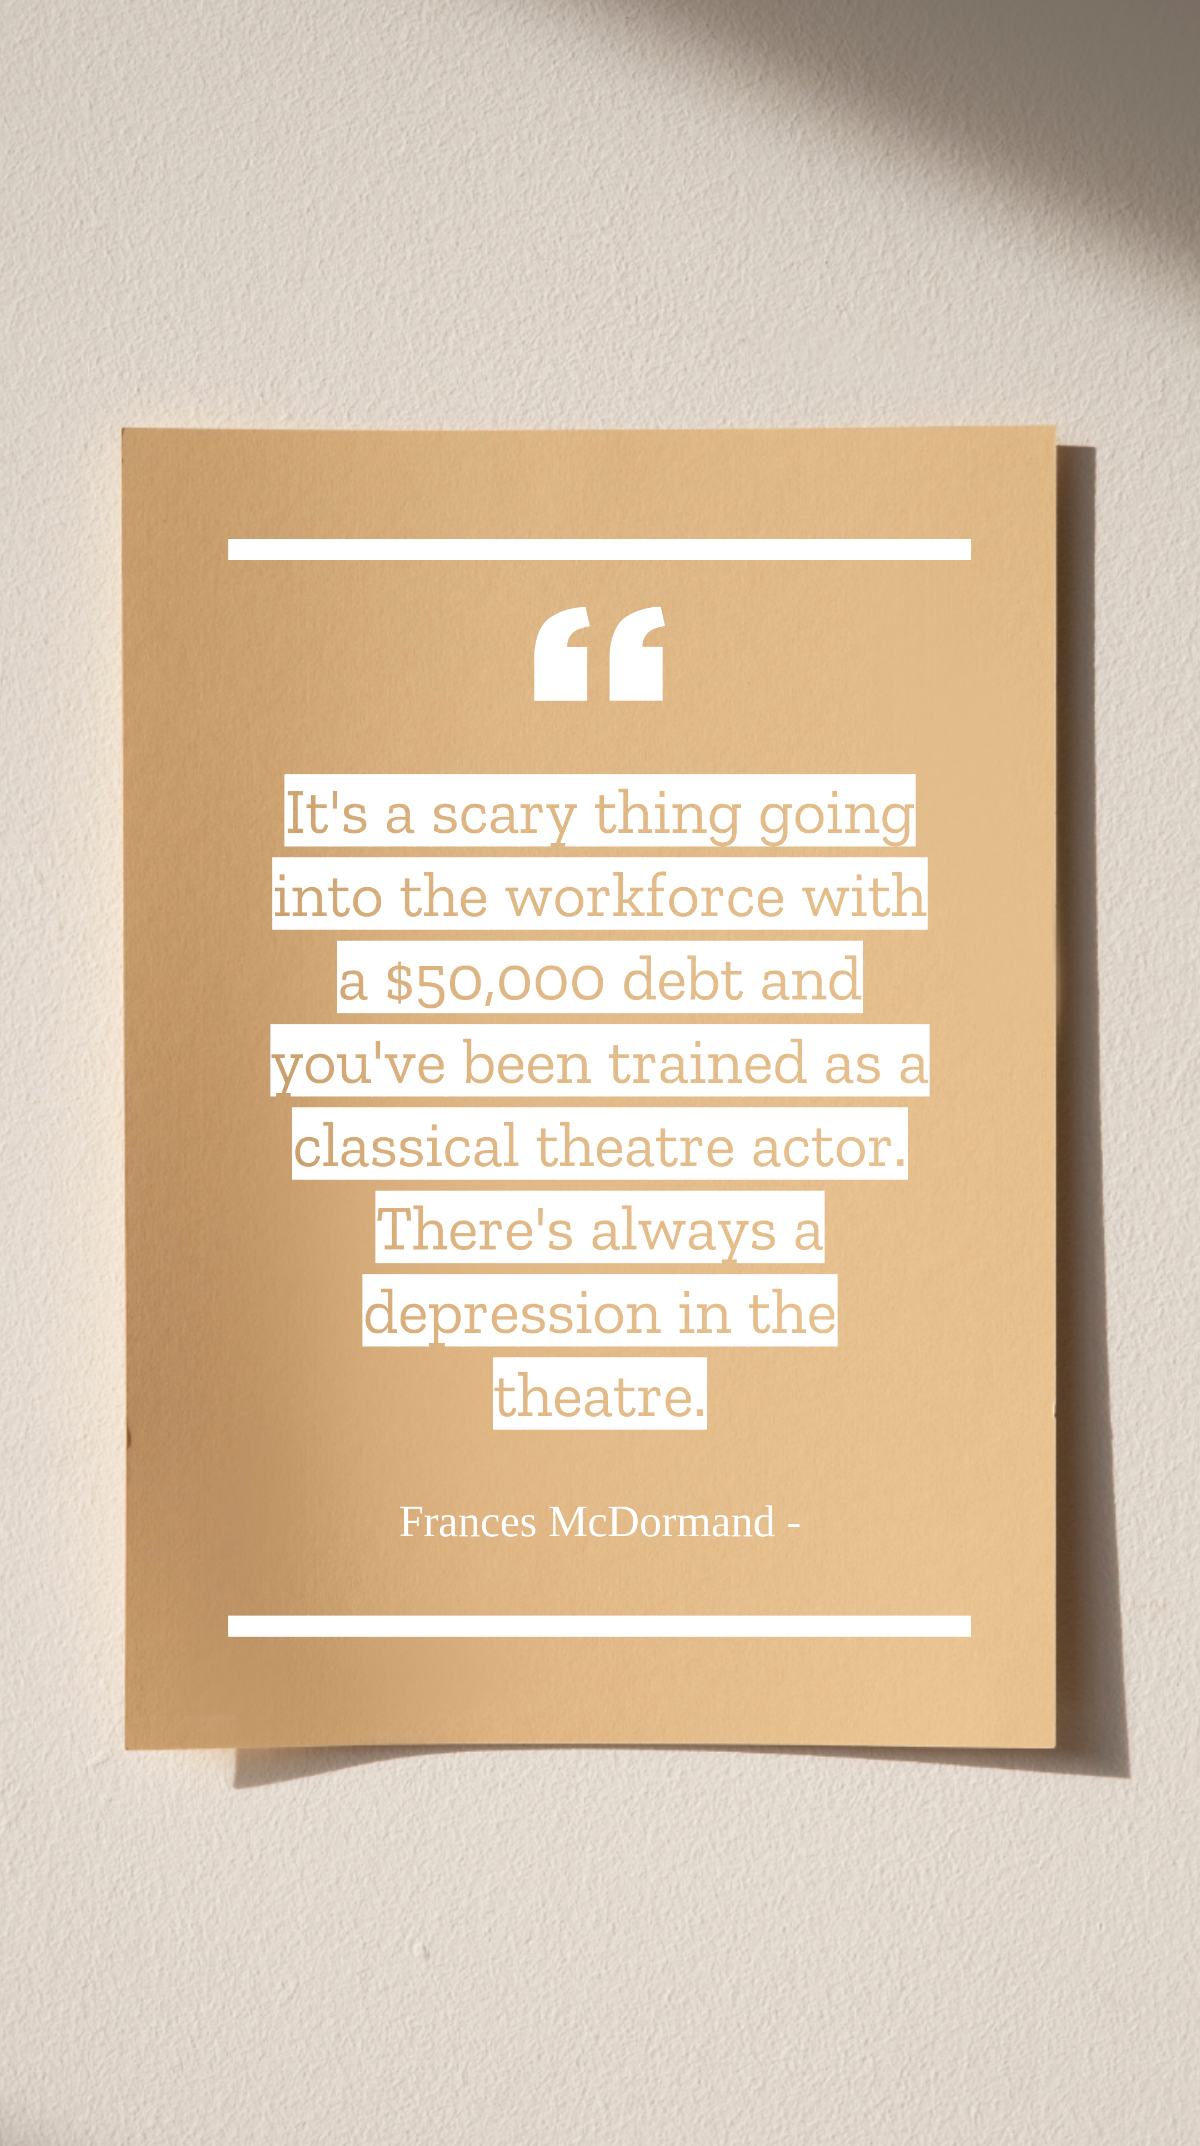 Frances McDormand - It's a scary thing going into the workforce with a $50,000 debt and you've been trained as a classical theatre actor. There's always a depression in the theatre. Template